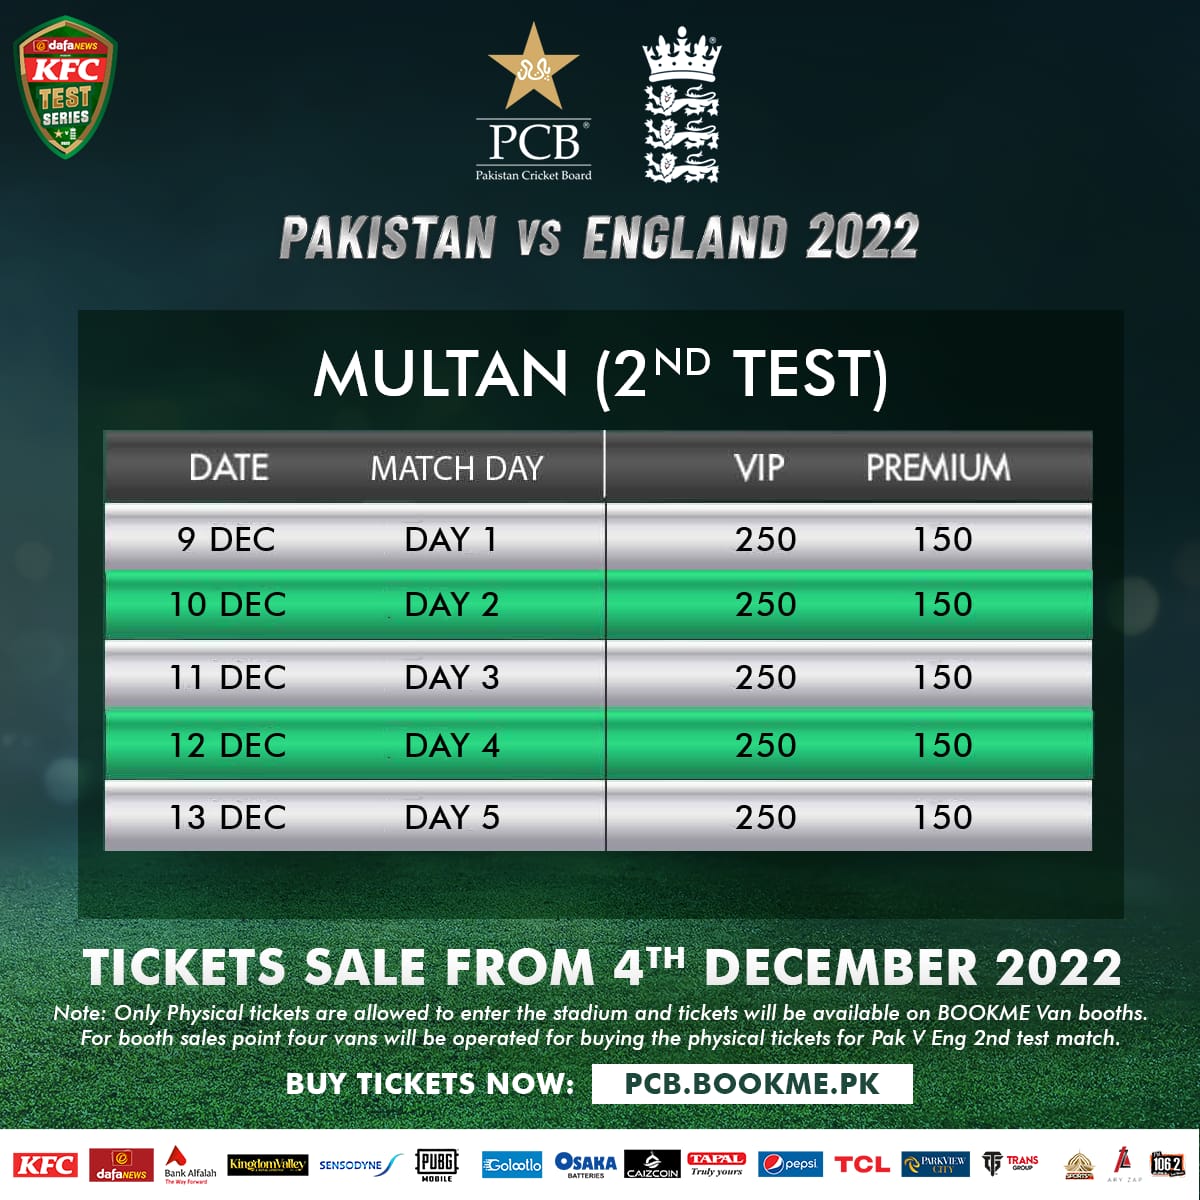 Tickets for Multan Test go on sale Press Release PCB